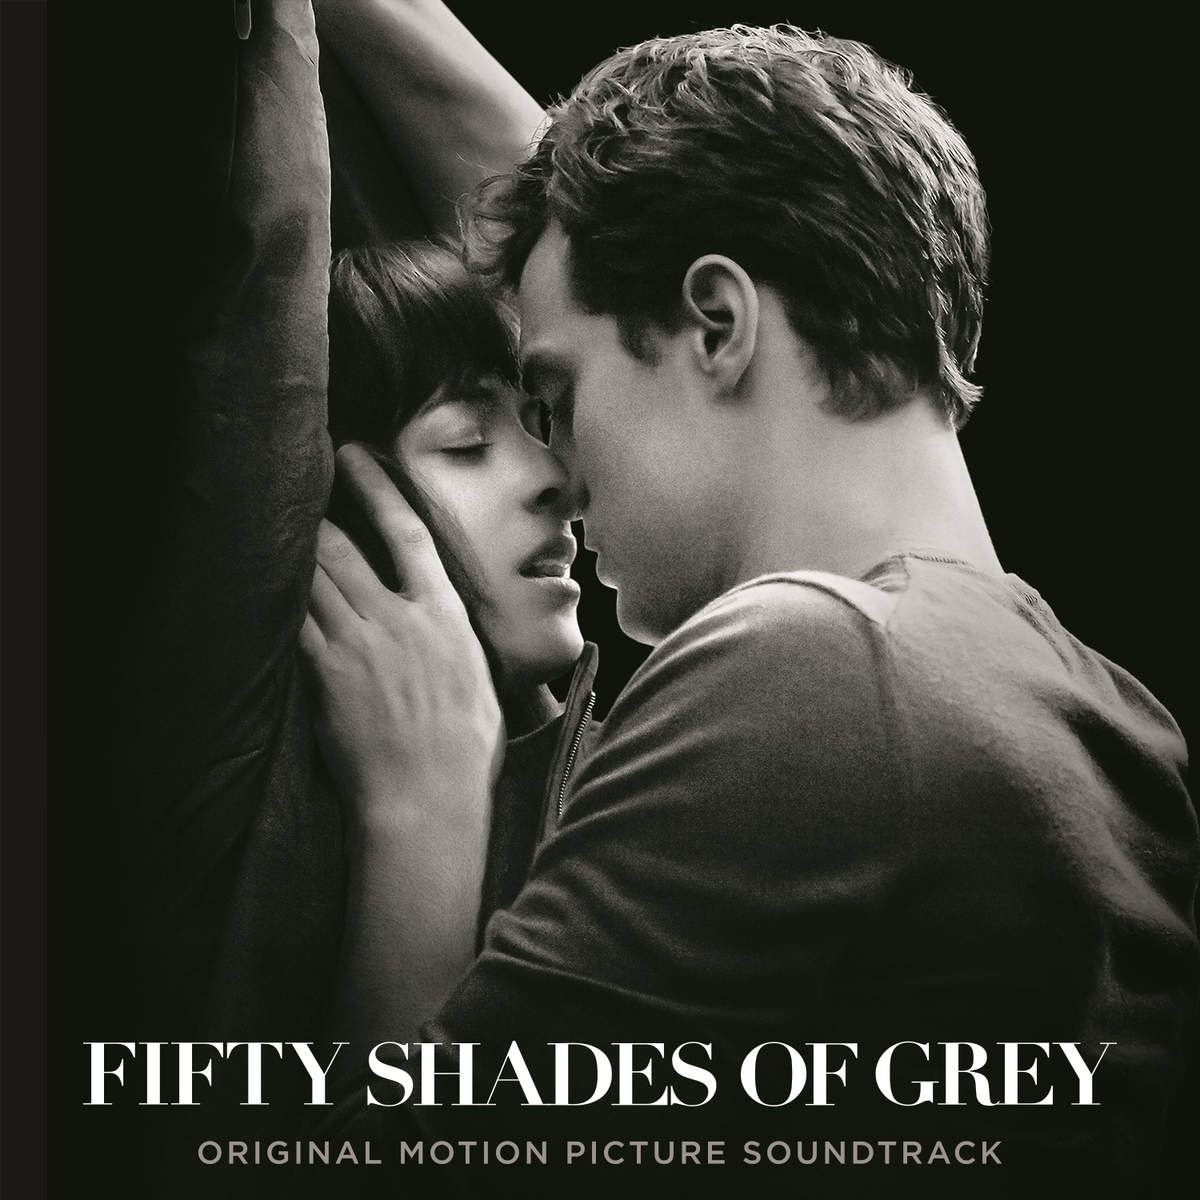 Undiscovered (From The "Fifty Shades of Grey" Soundtrack)